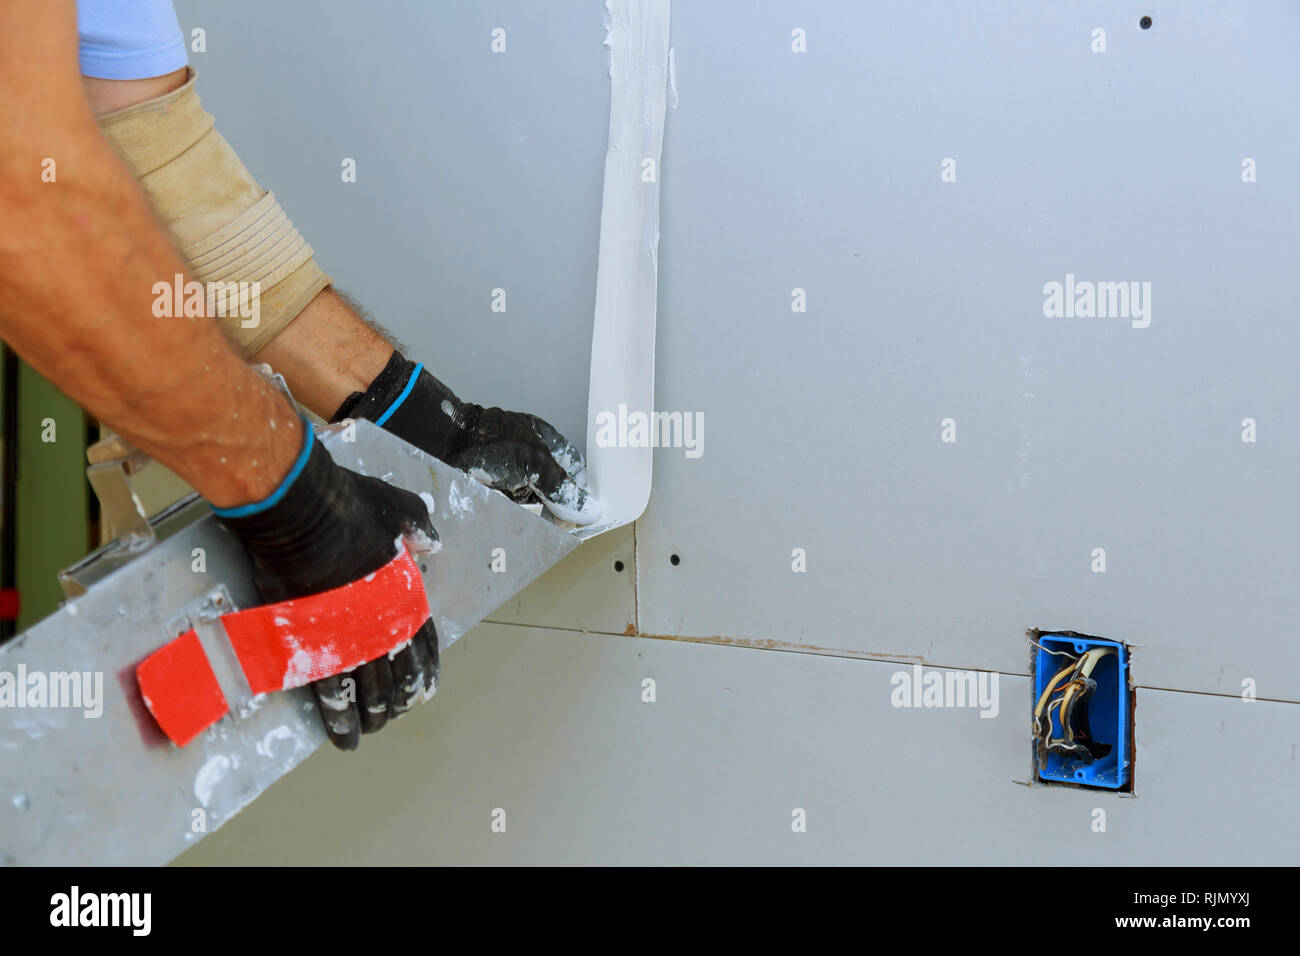 Worker Installing Gypsum Board To Wall Interior Of A Room